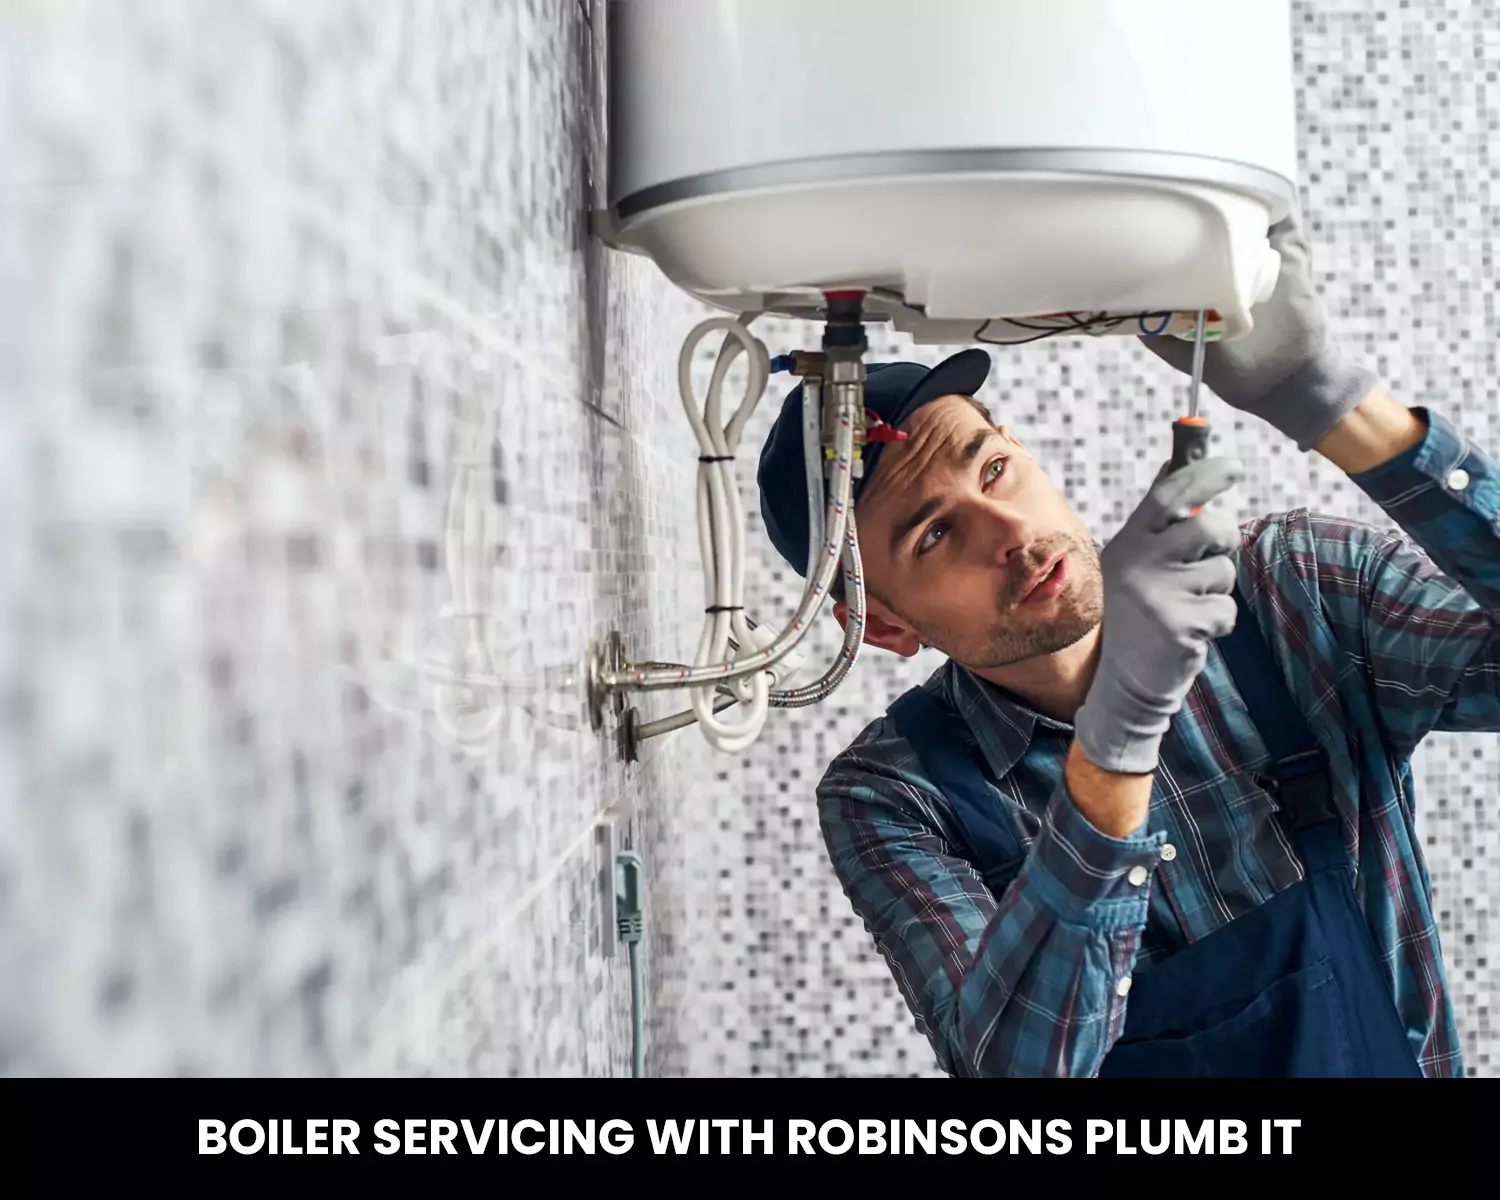 Boiler Servicing With Robinsons Plumb It